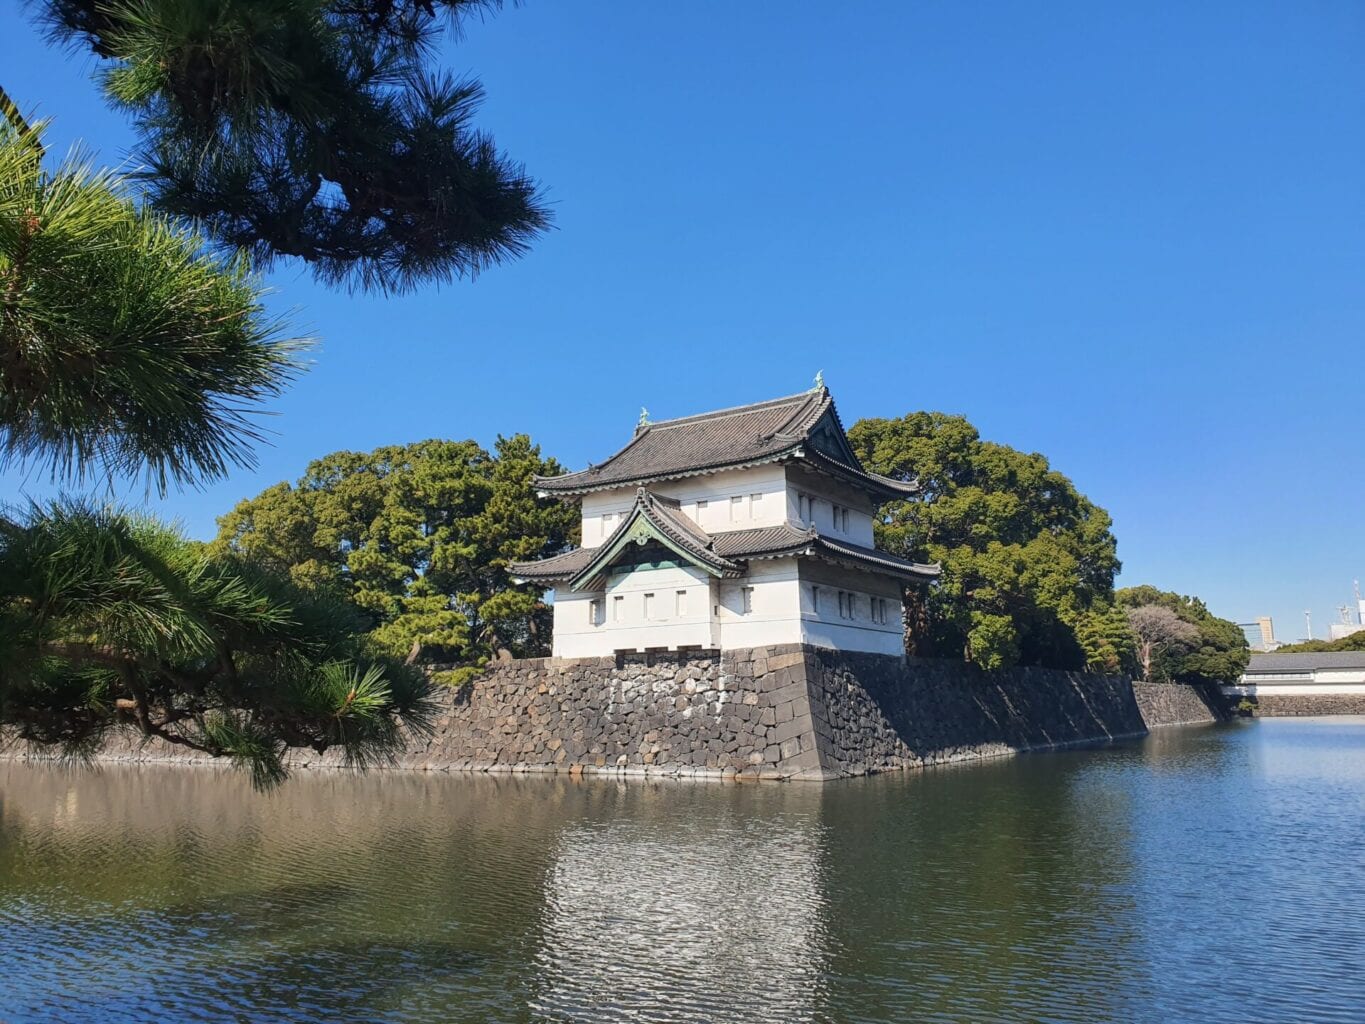 The Imperial Palace near Ginza, Tokyo